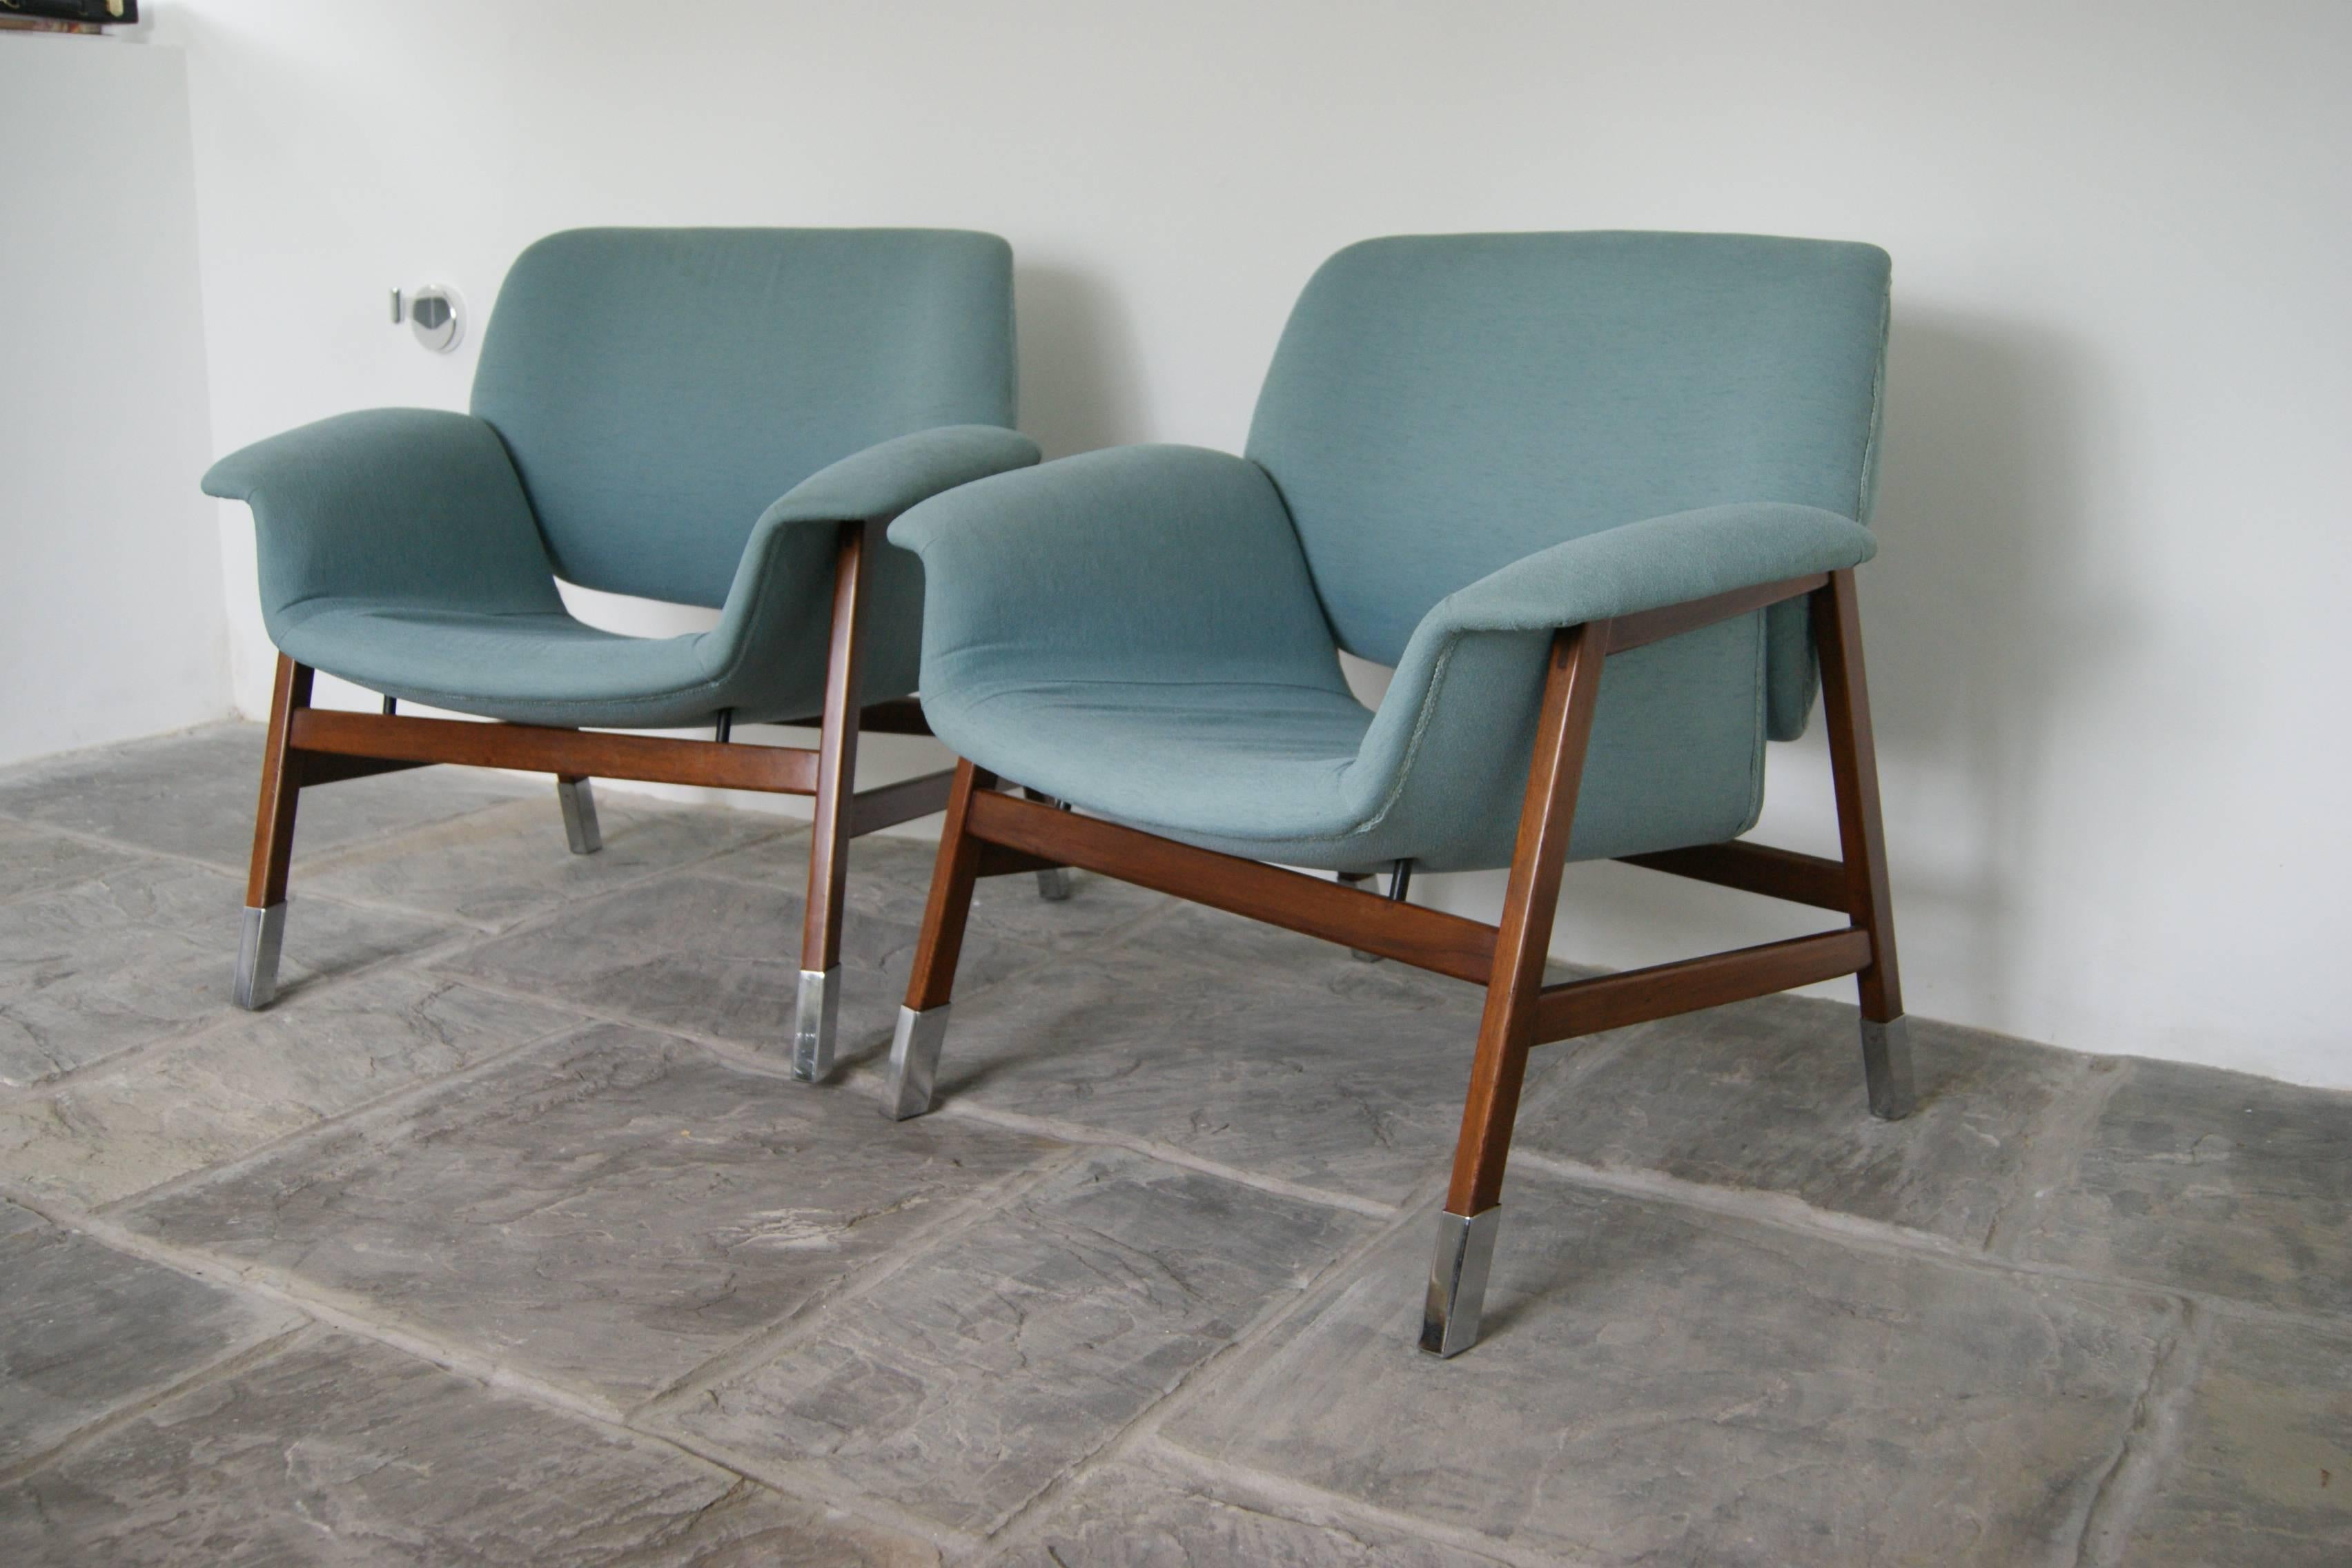 Pair of Gianfranco Frattini model 849. Armchairs for Cassina, 1956.
Nominated for the Compasso d’oro Prize.

Walnut base with stainless steel feet, Upholstered in original cotton fabric.